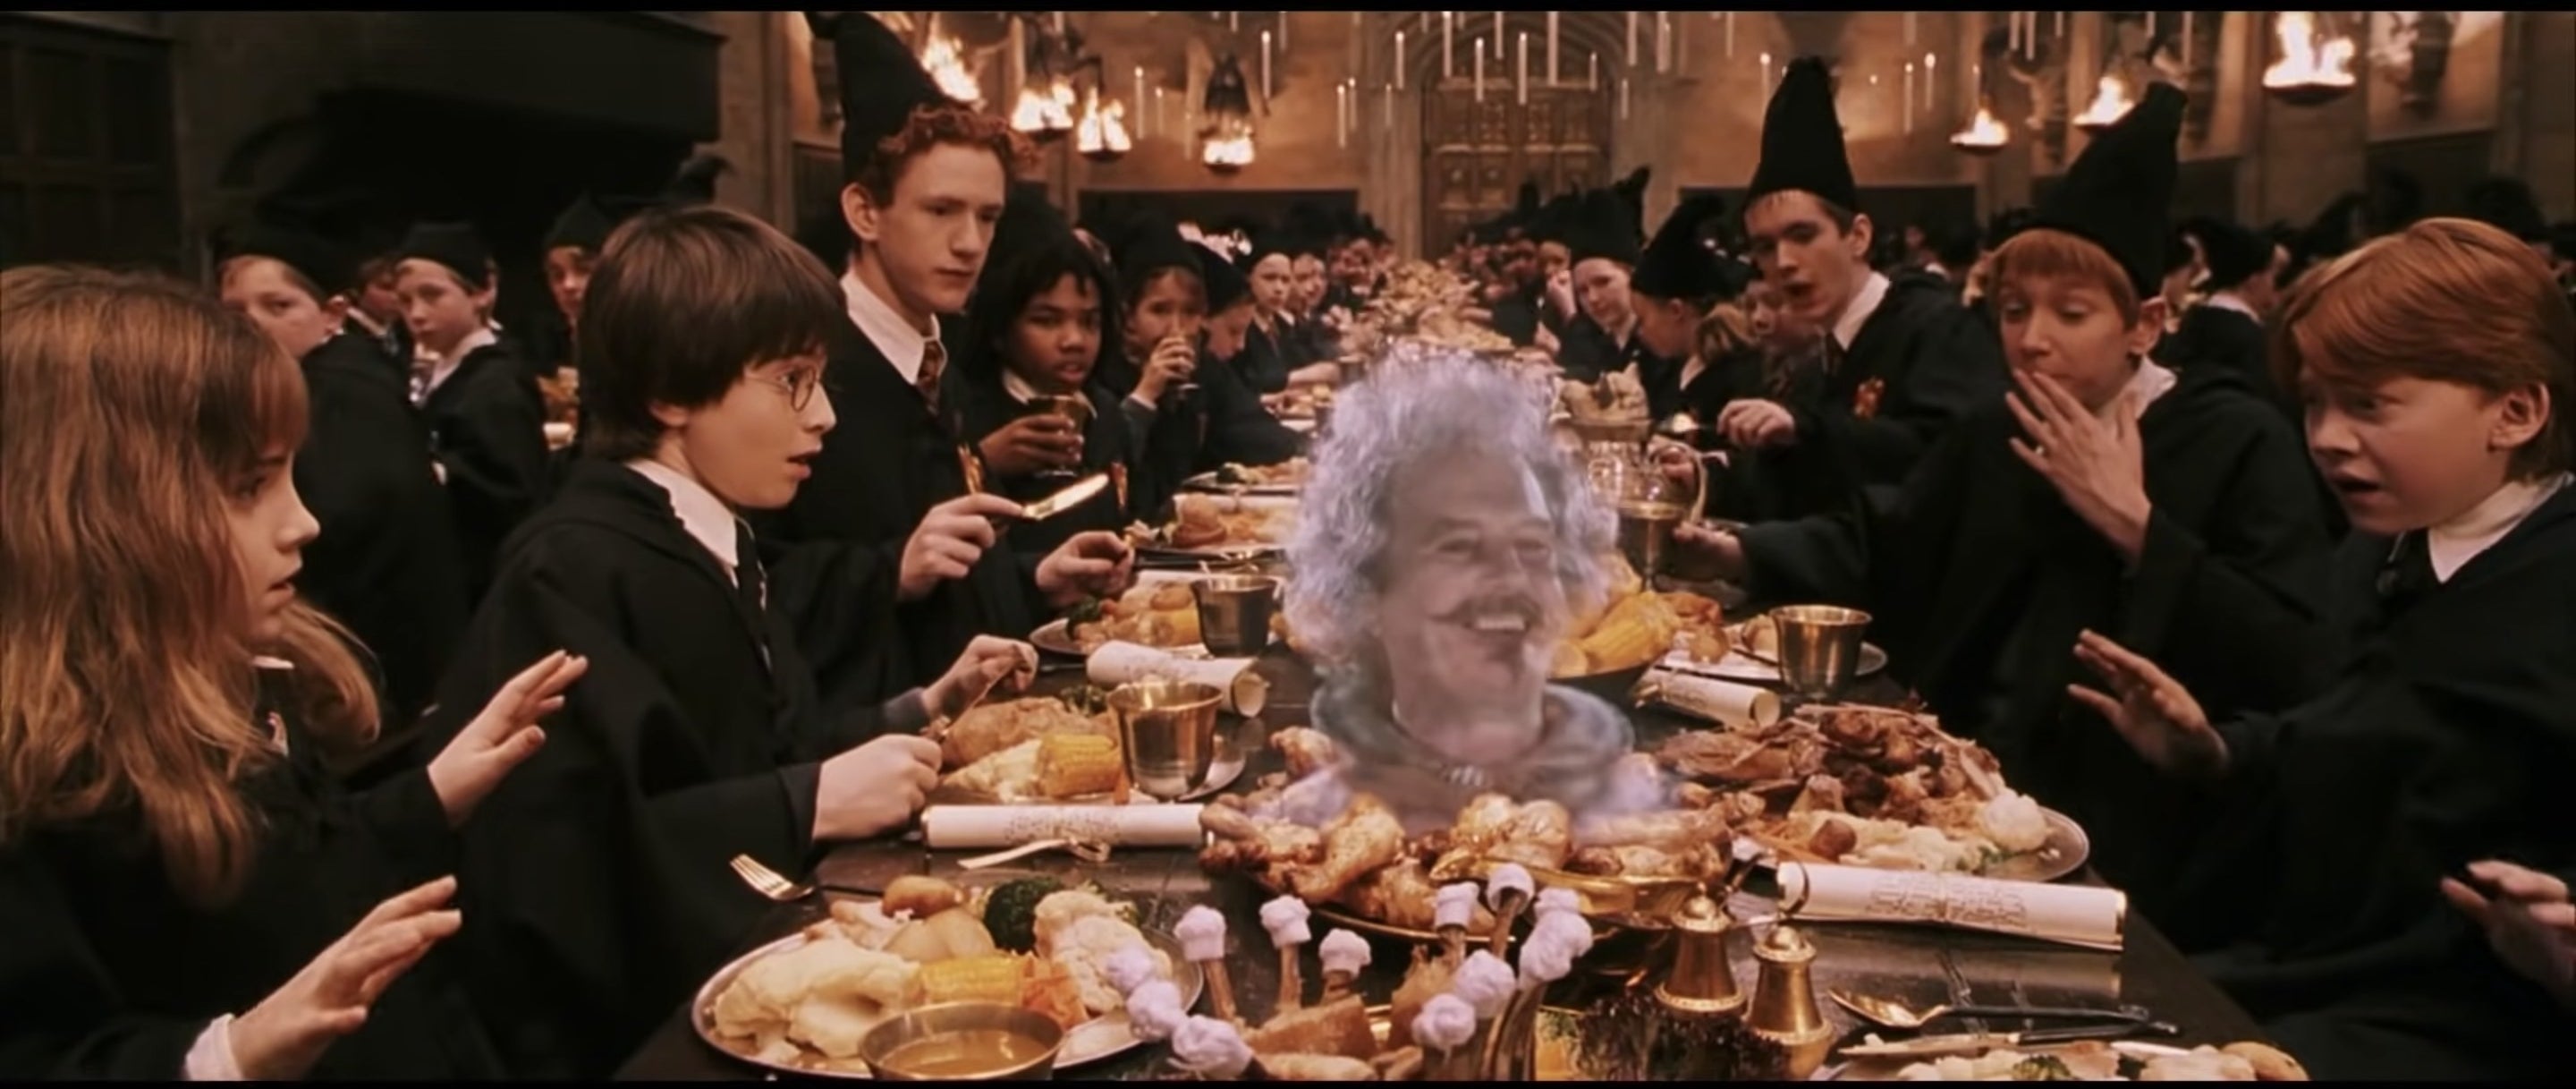 Nearly Headless Nick popping out of table at Hogwarts